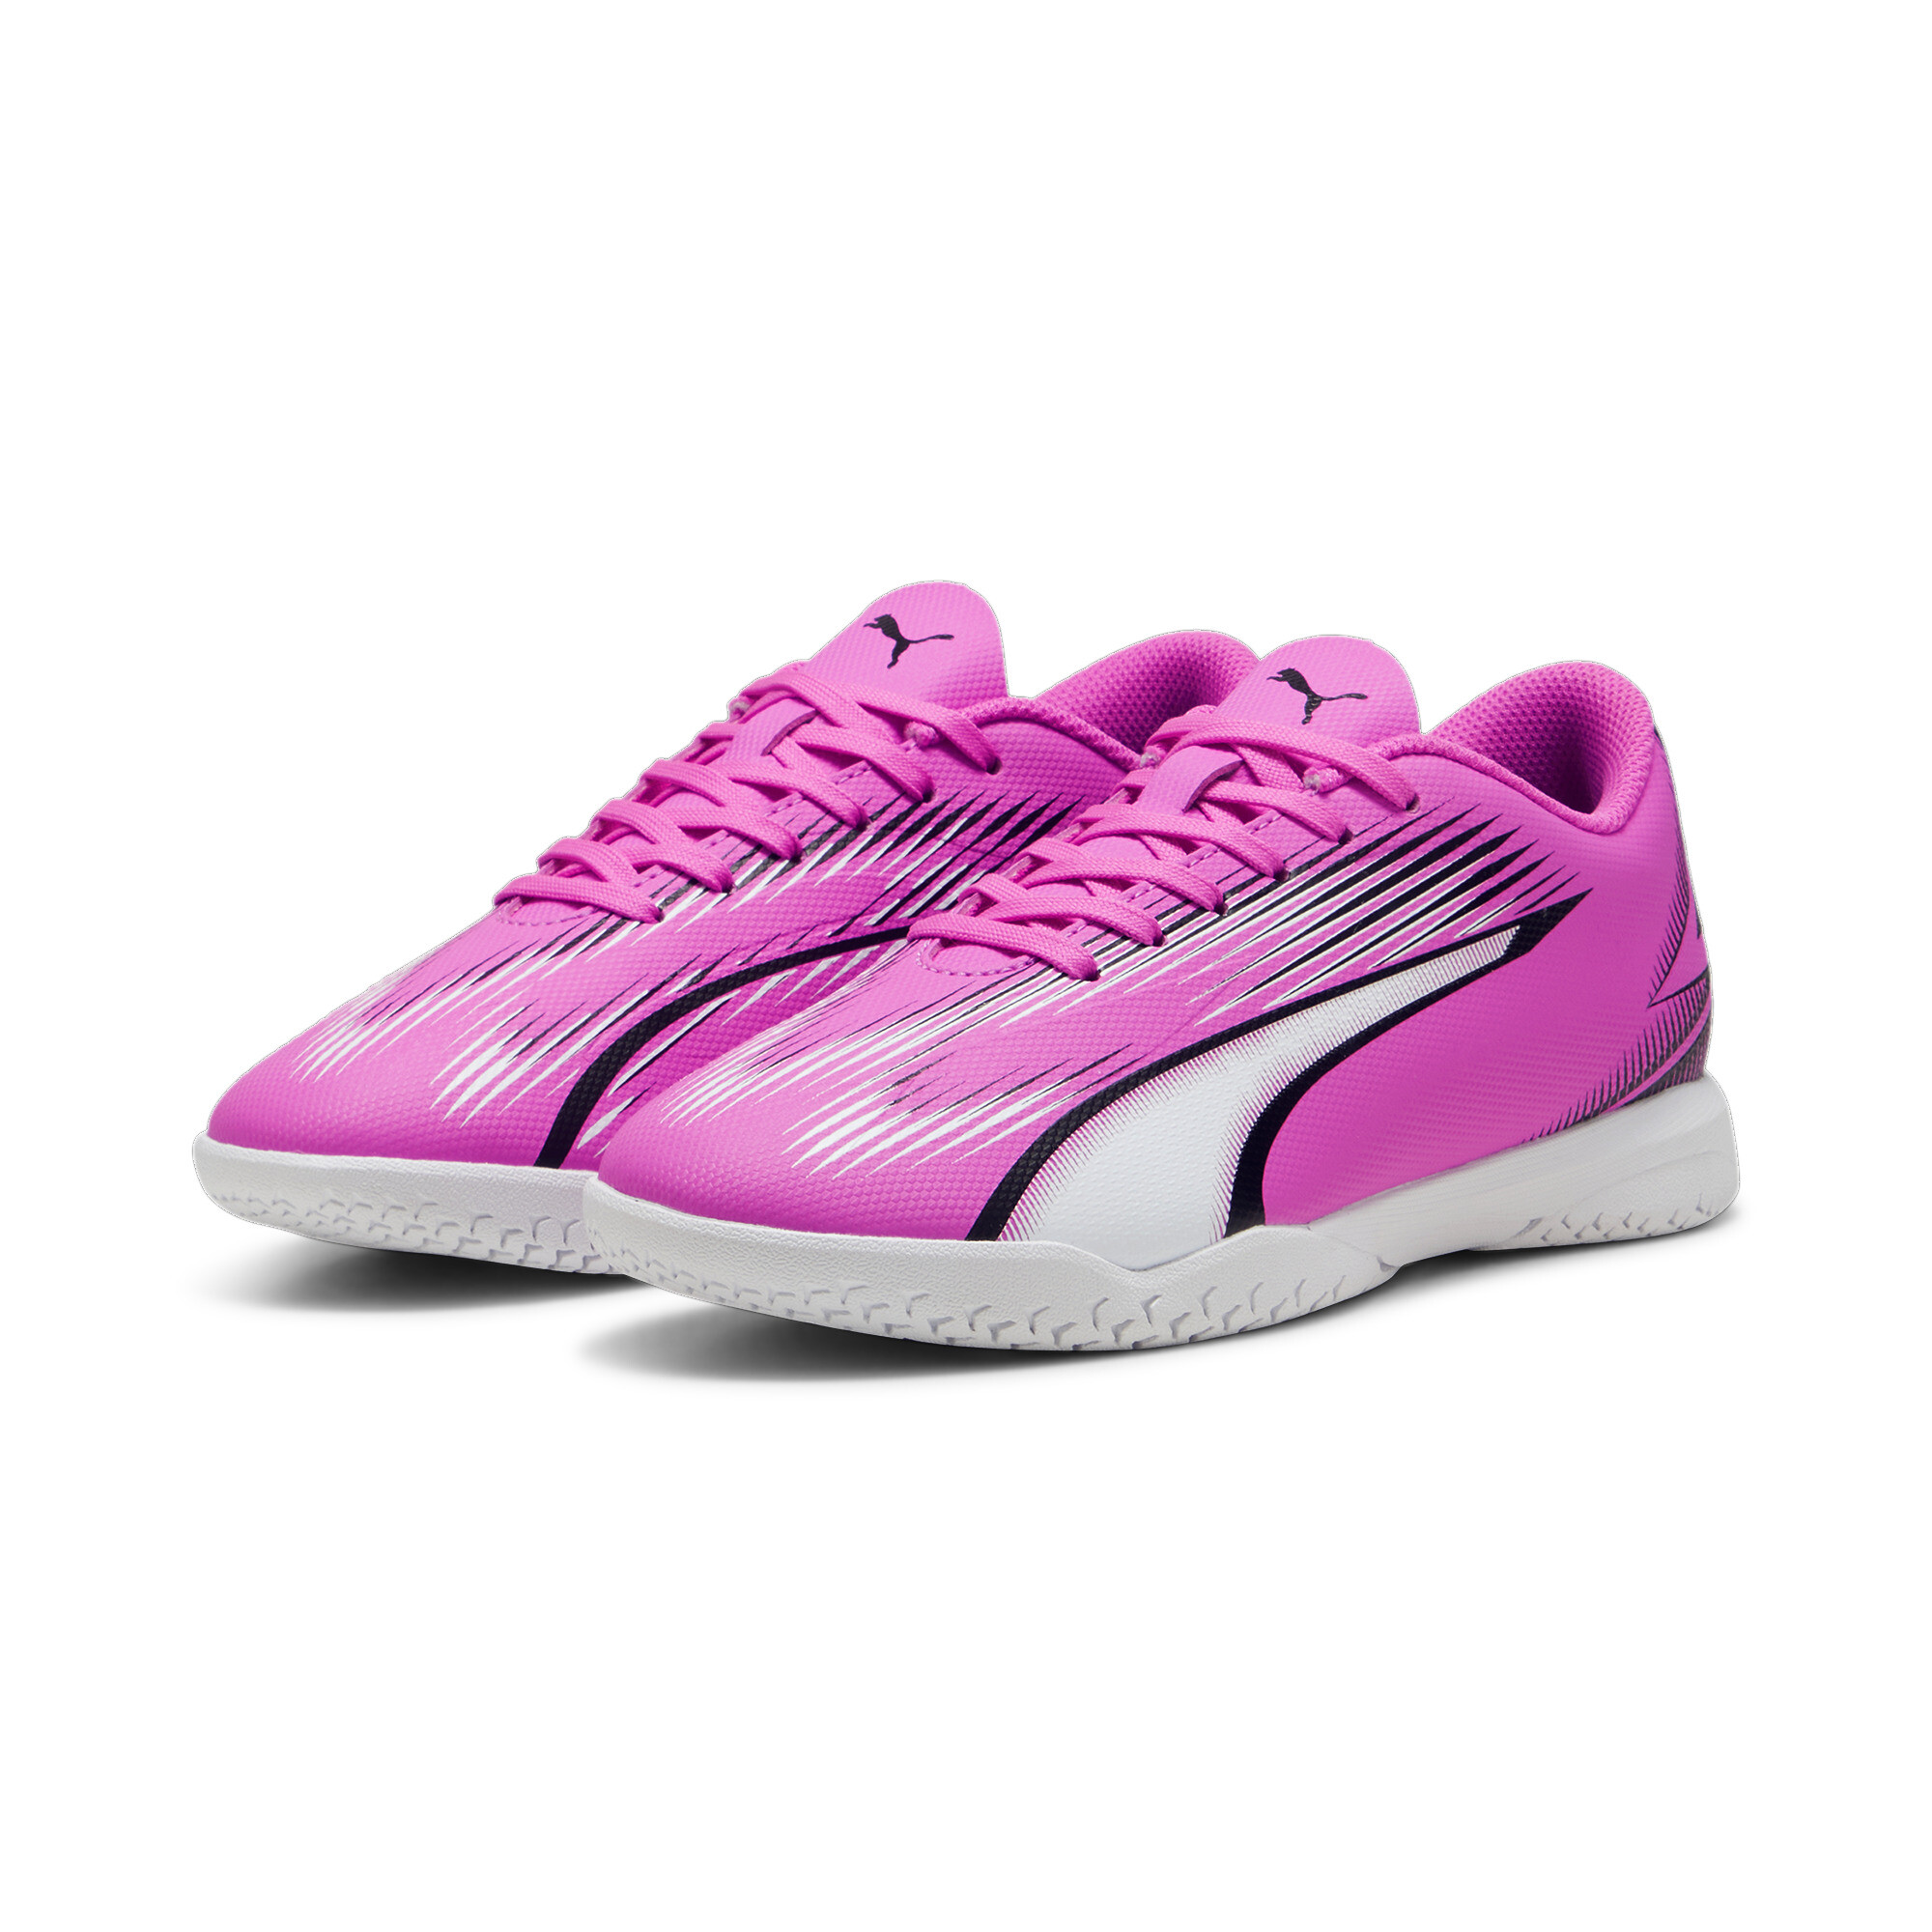 Puma ULTRA PLAY IT Youth Football Boots, Pink, Size 38.5, Shoes